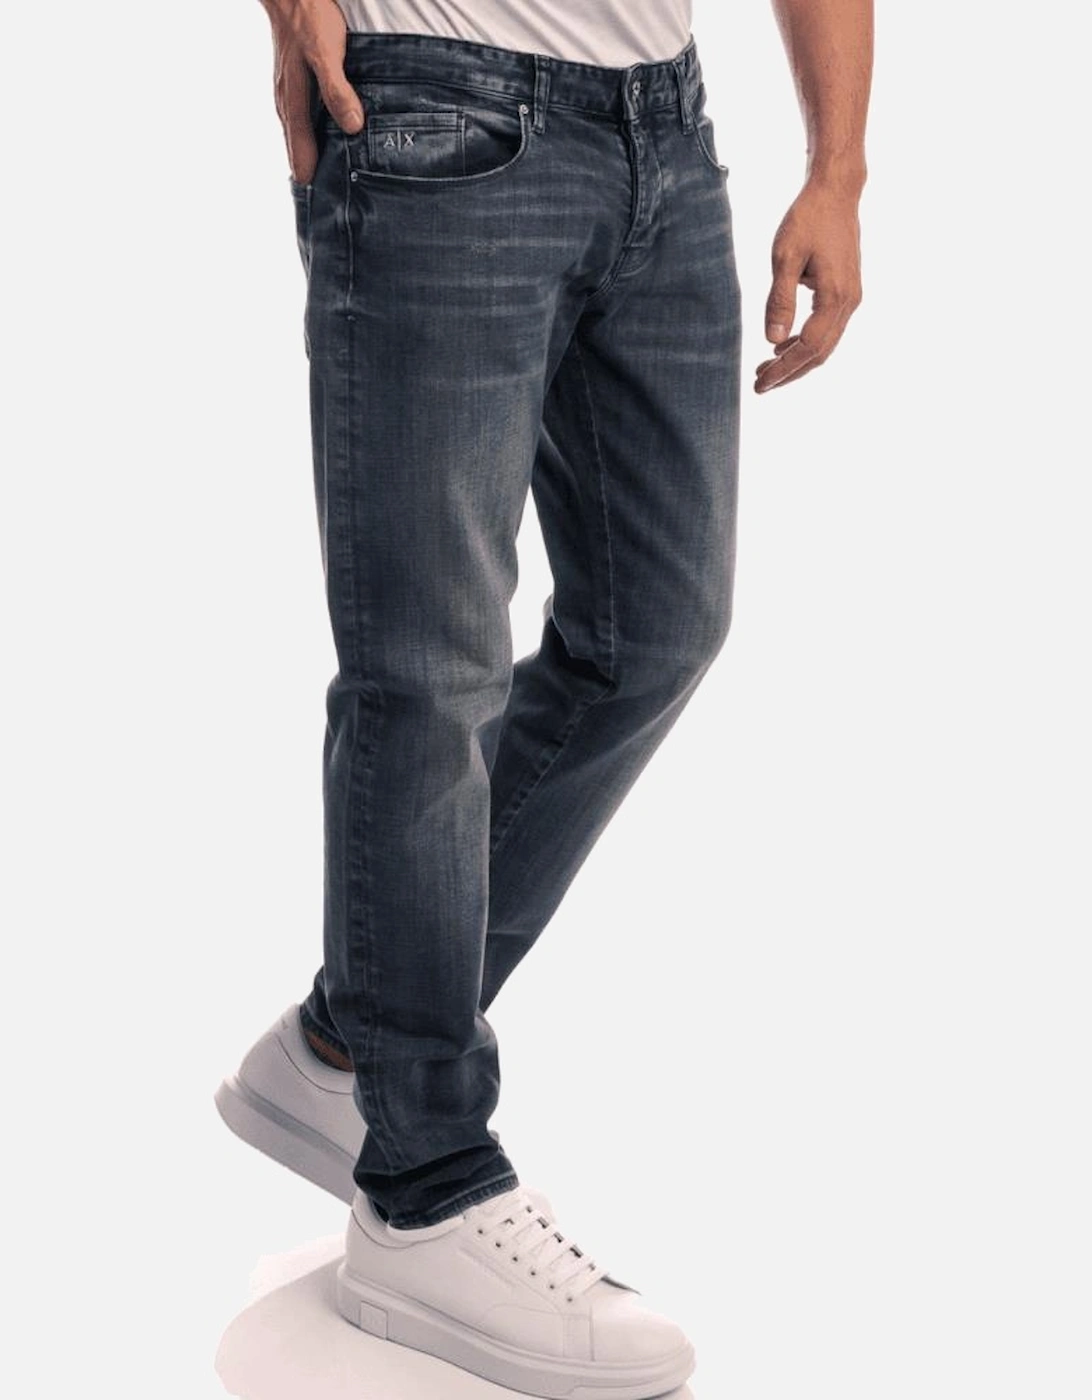 Cotton Tailored Skinny Fit Indigo Blue Jeans